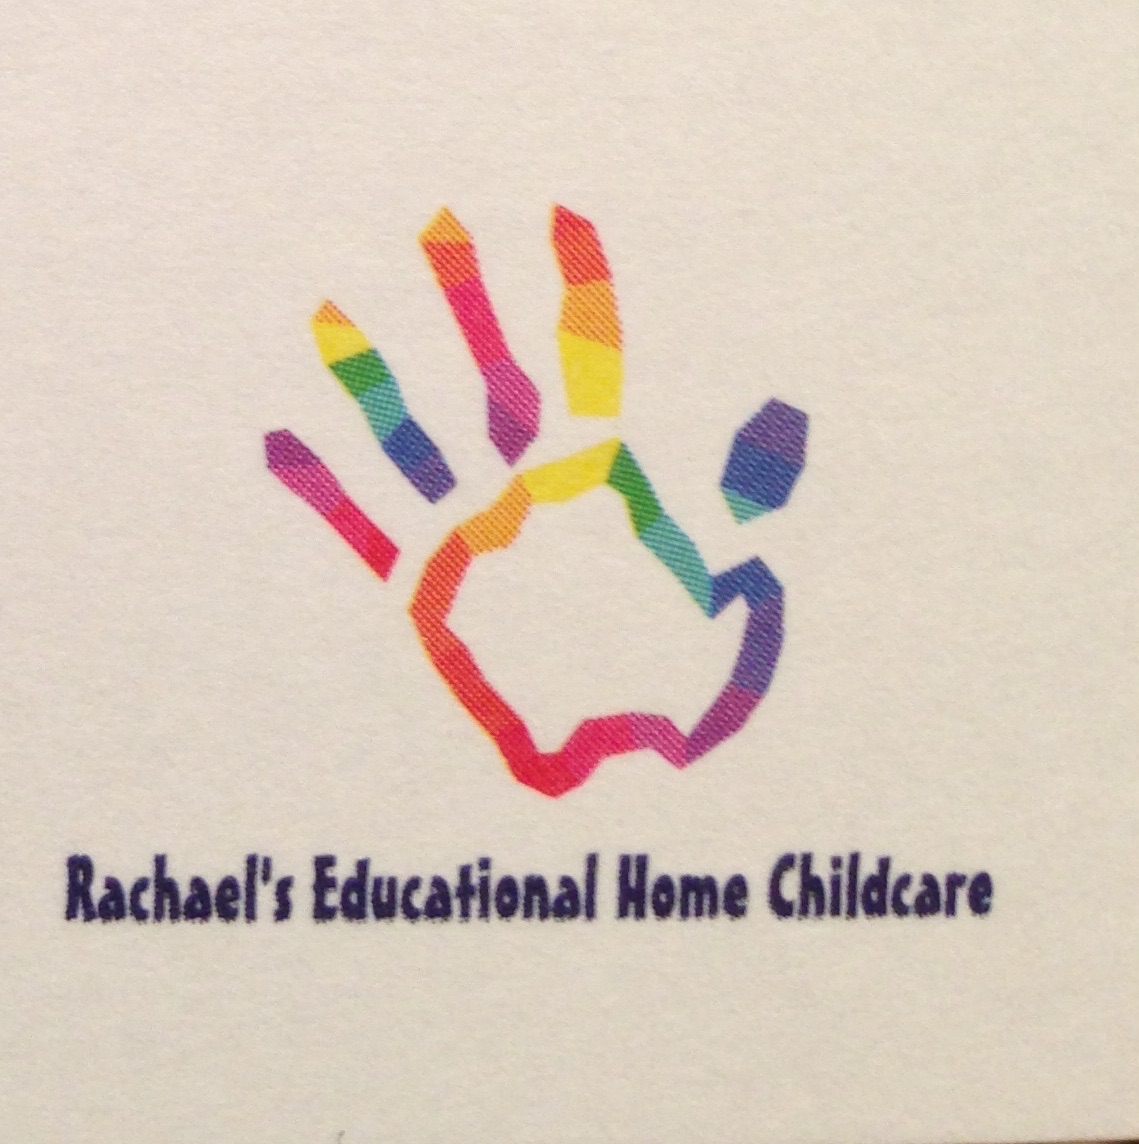 Rachaels Educational Home Childcare